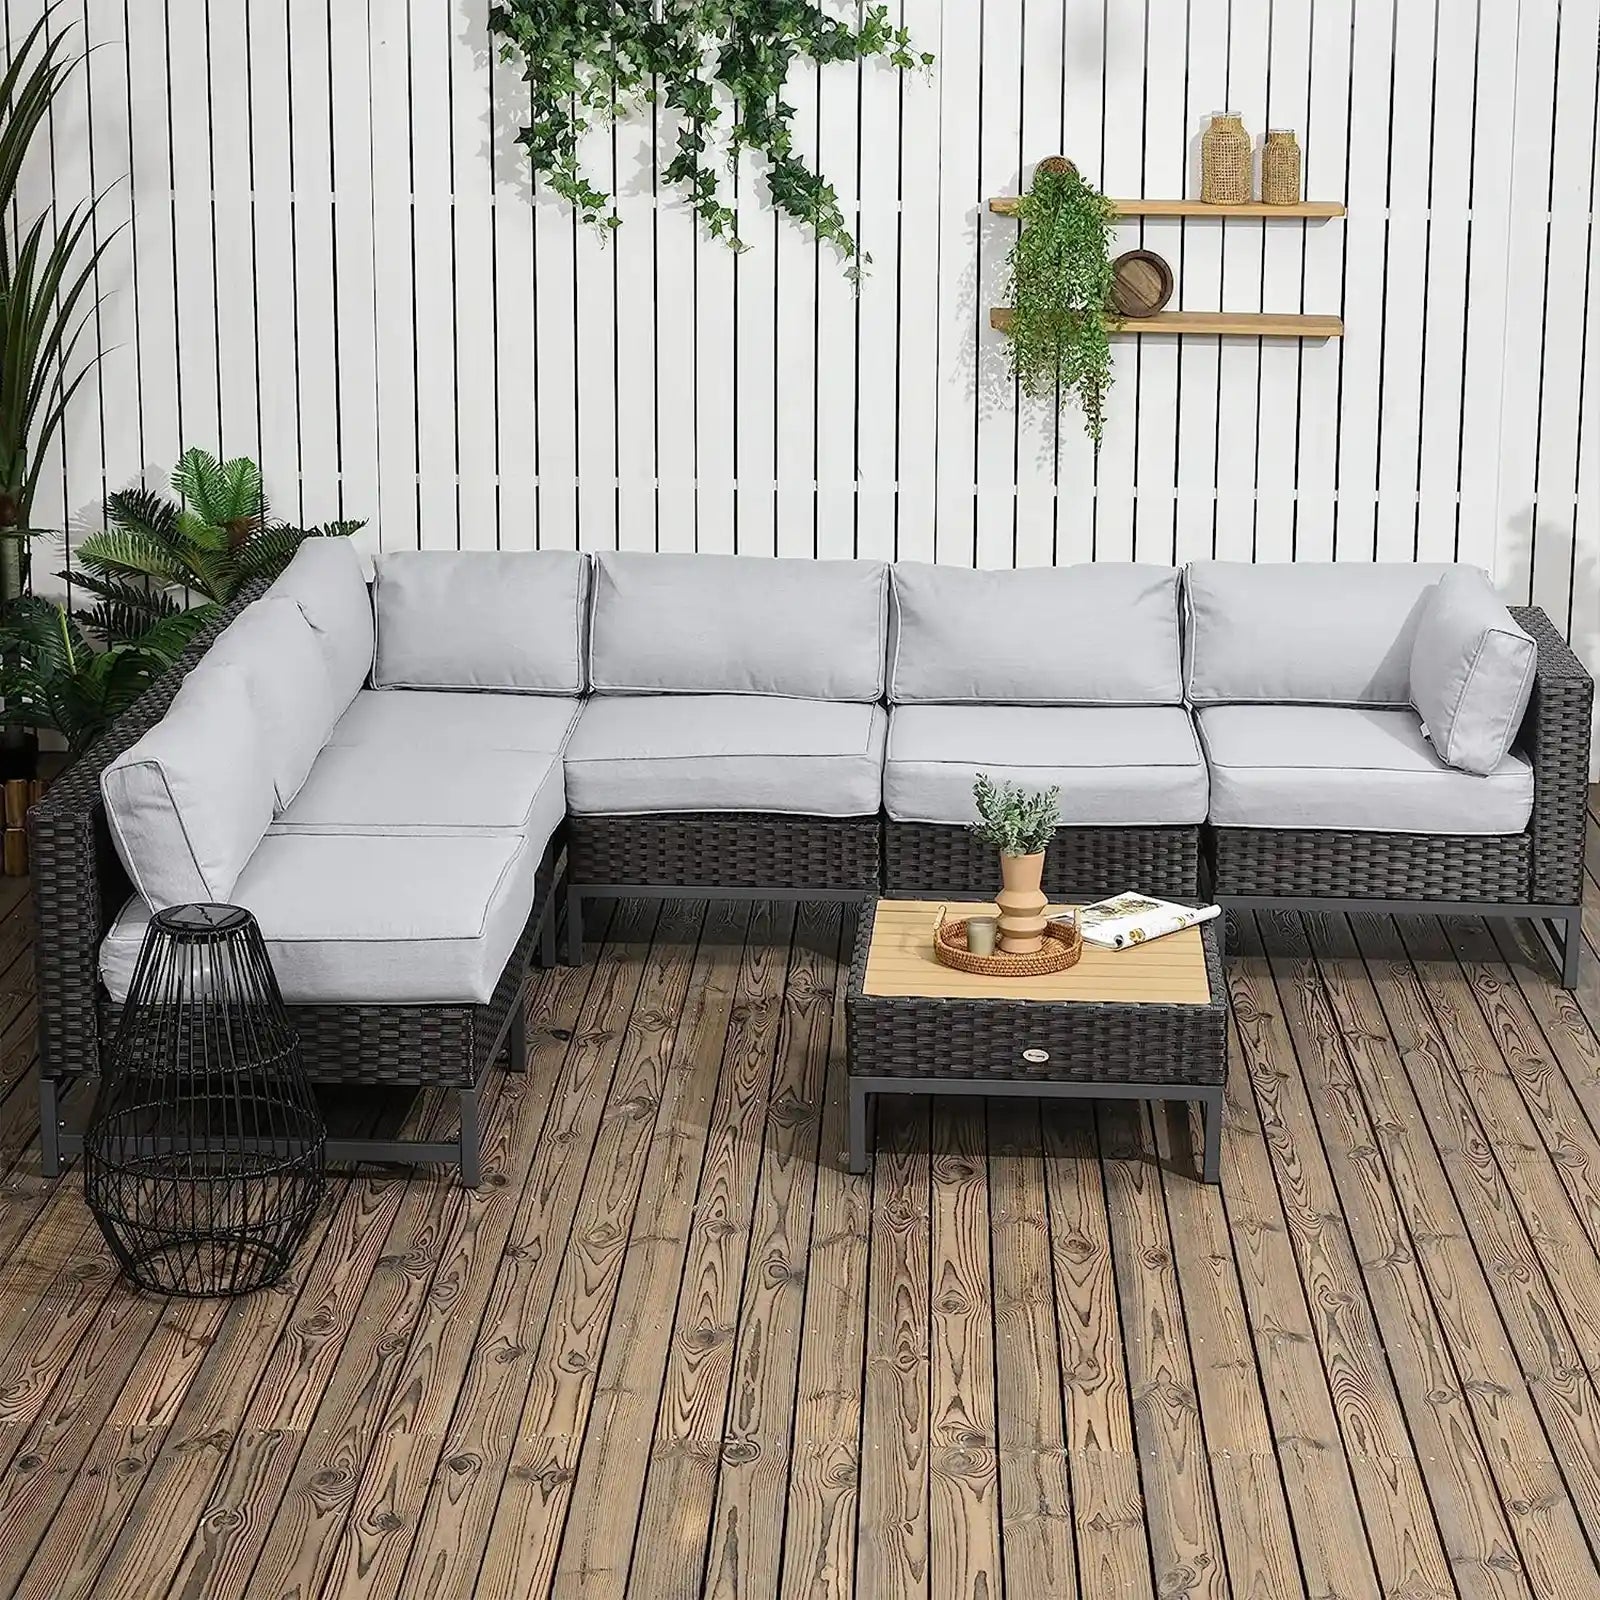 7 Piece Outdoor Patio Furniture Set with 4.75" Thick Cushions, Aluminum Frame Outdoor PE Rattan Wicker Sectional Sofa Set with Slat Wood Grain Plastic Top Coffee Table